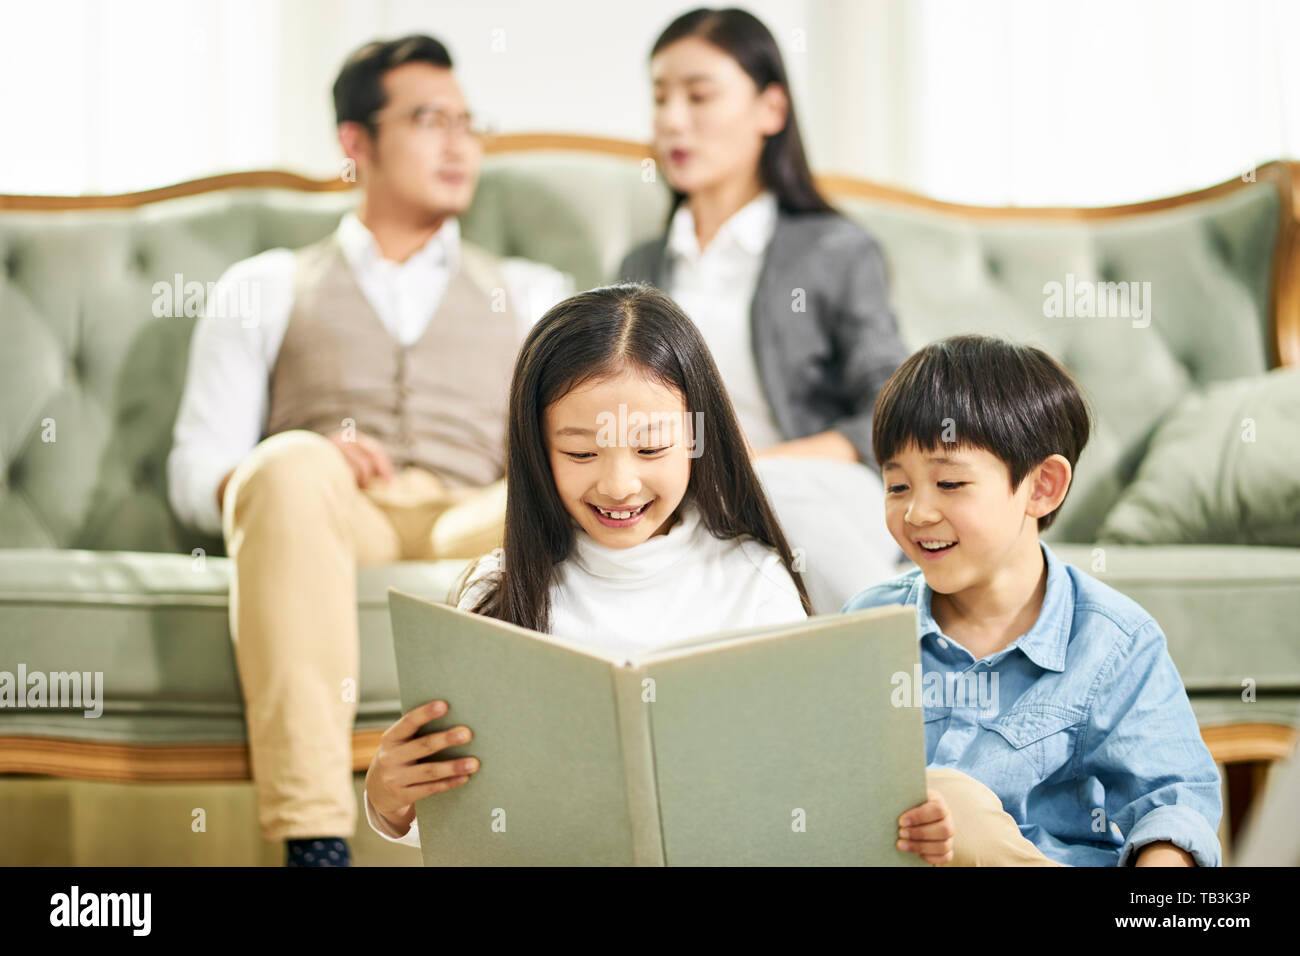 two asian kids brother and sister sitting on carpet reading book together in family living room with parents sitting on couch in the background. Stock Photo